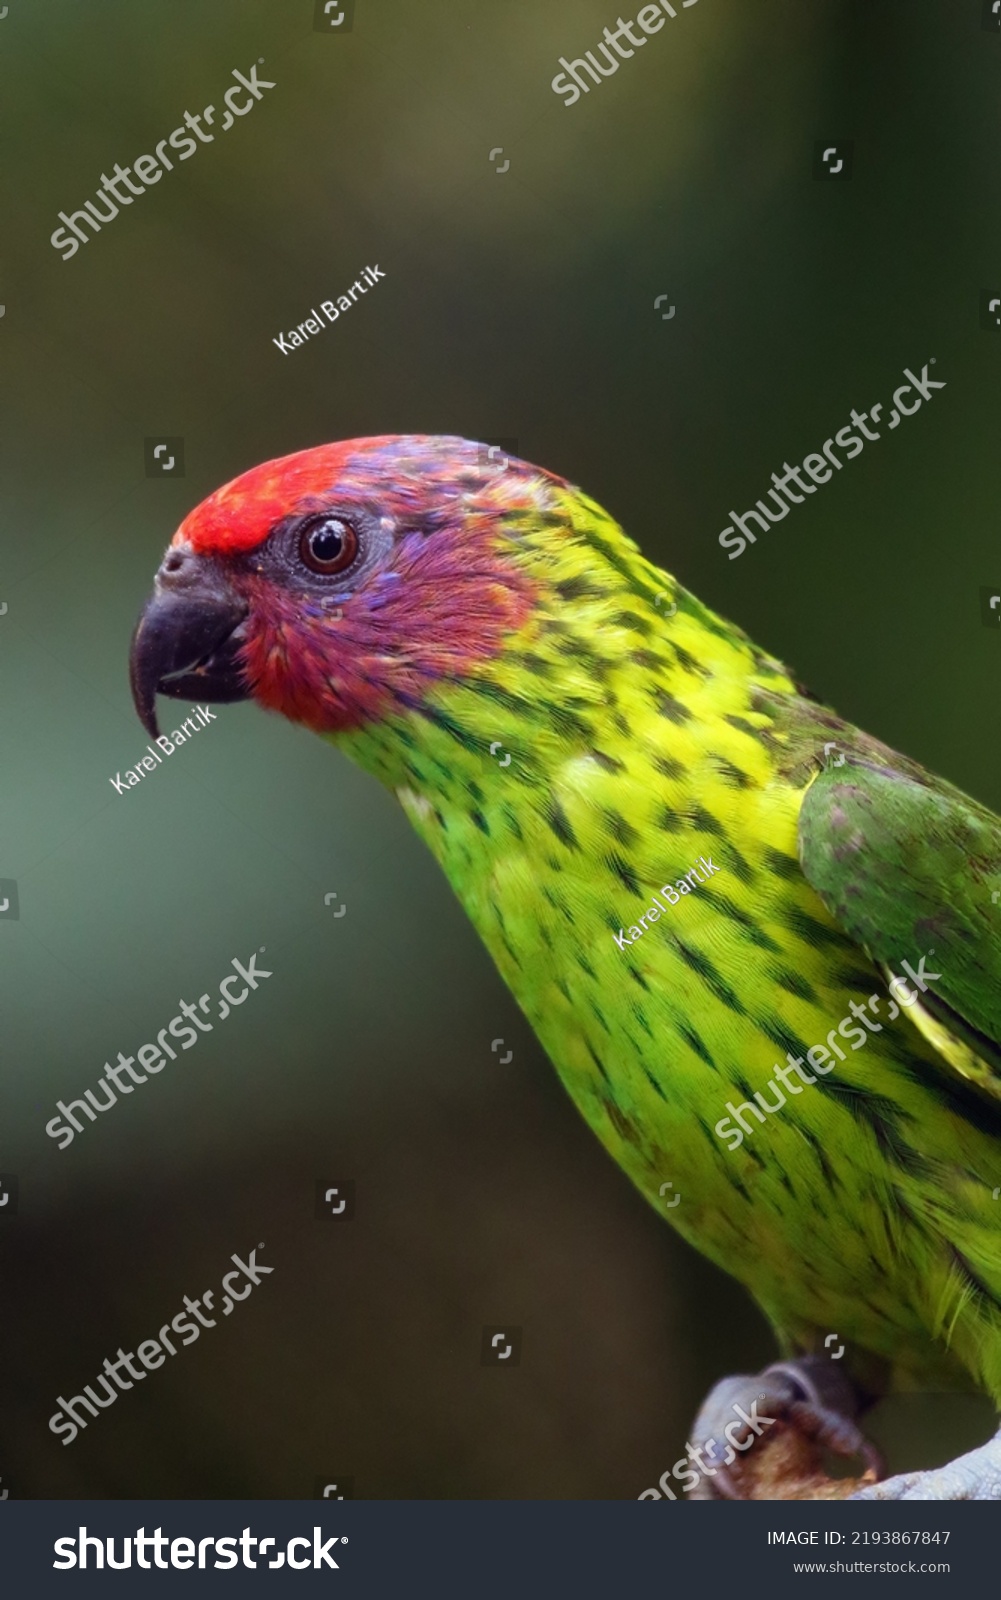 Goldie lorikeet (Glossoptilus goldiei), portrait of a green parrot with a purple head and colorful background. Portrait of a rare parrot. #2193867847